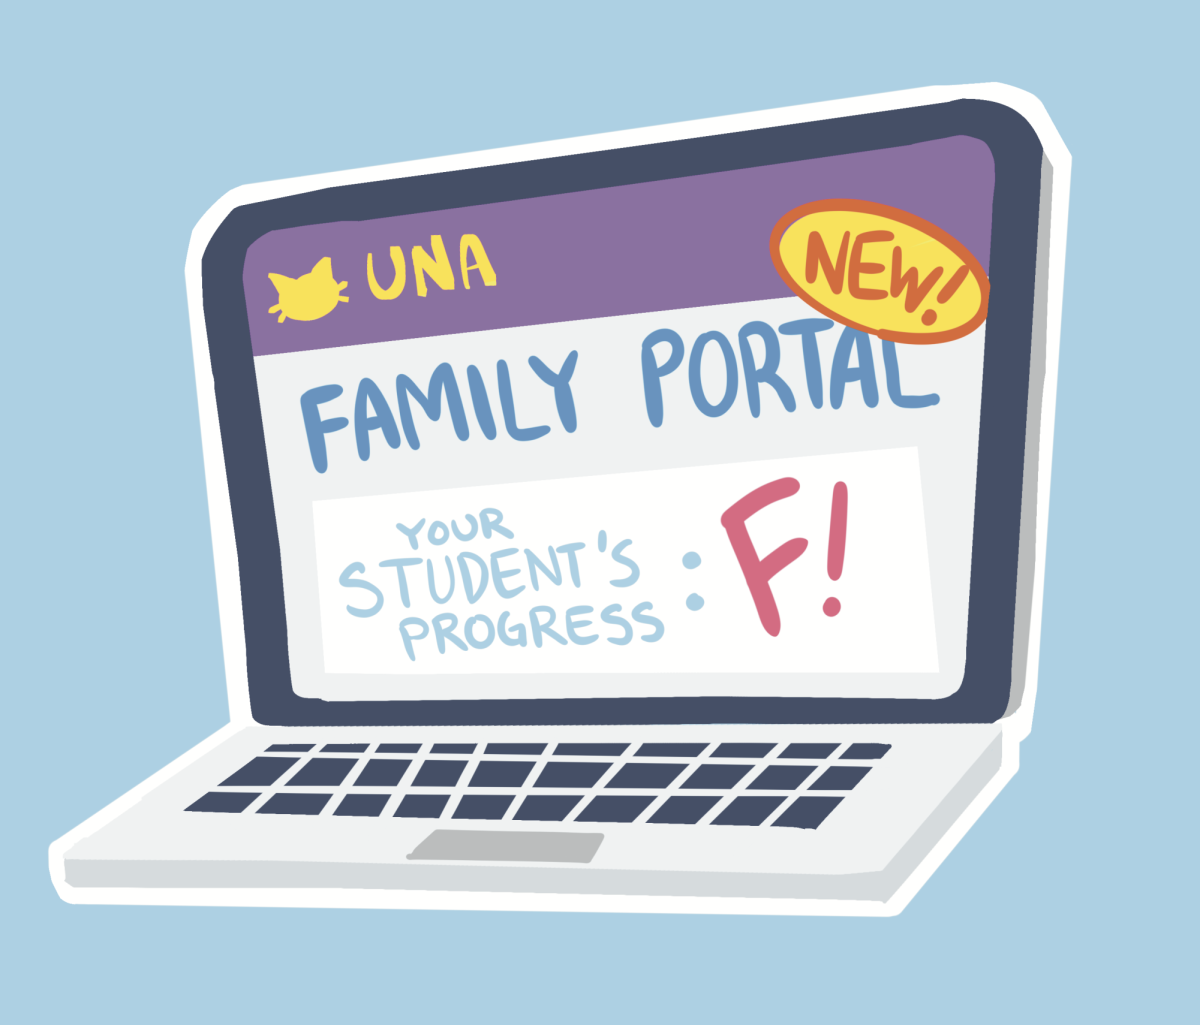 UNA+introduces+new+Family+Portal+for+parents